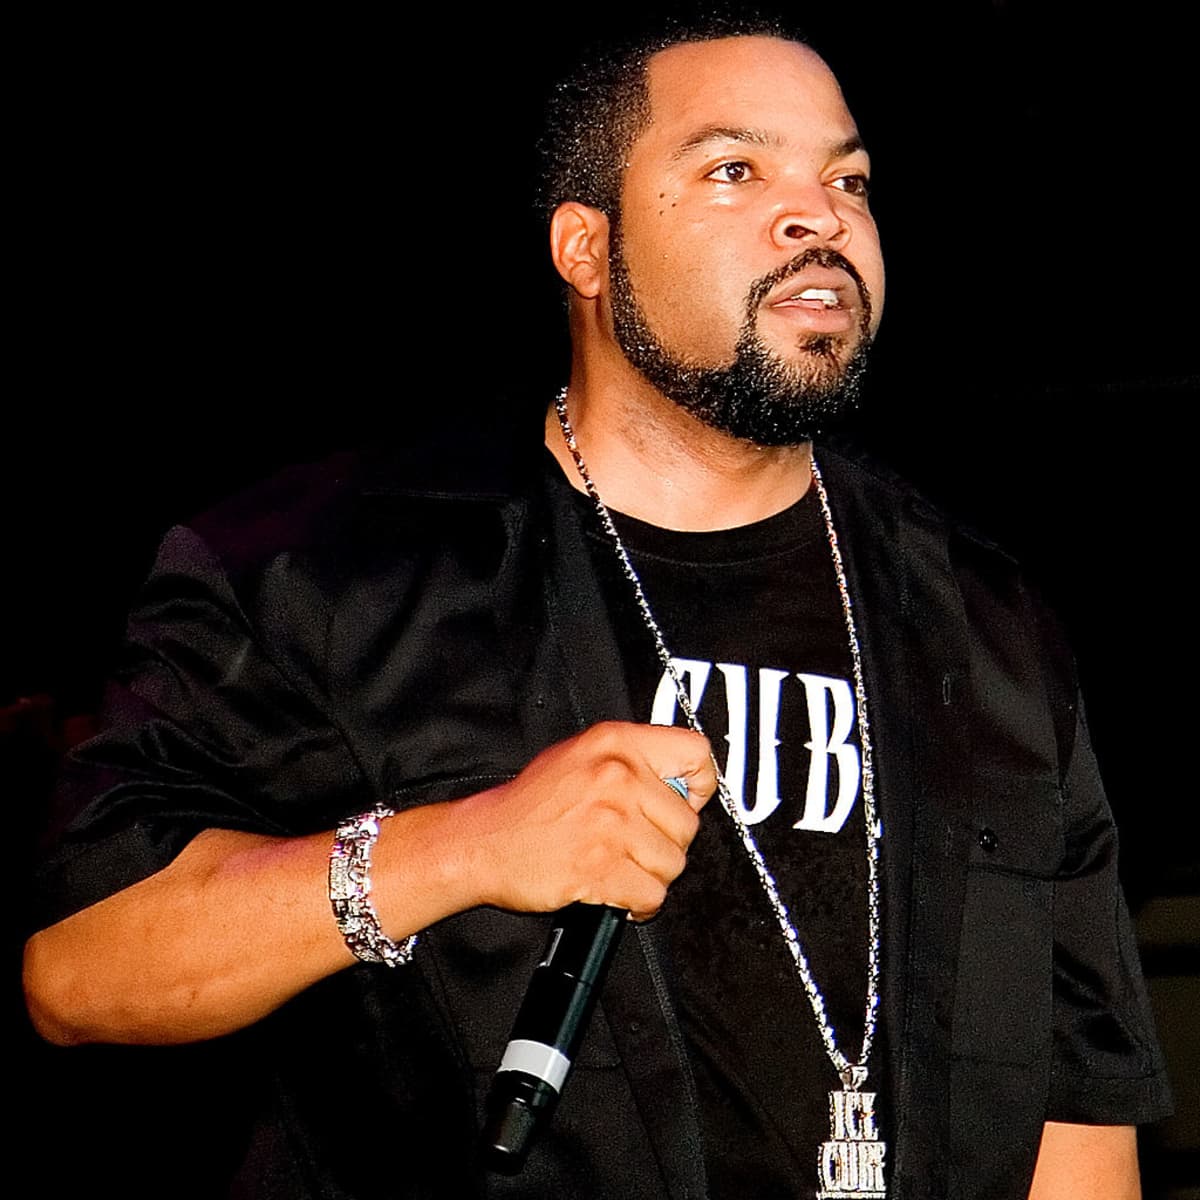 Ice Cube Exposed photo picture picture